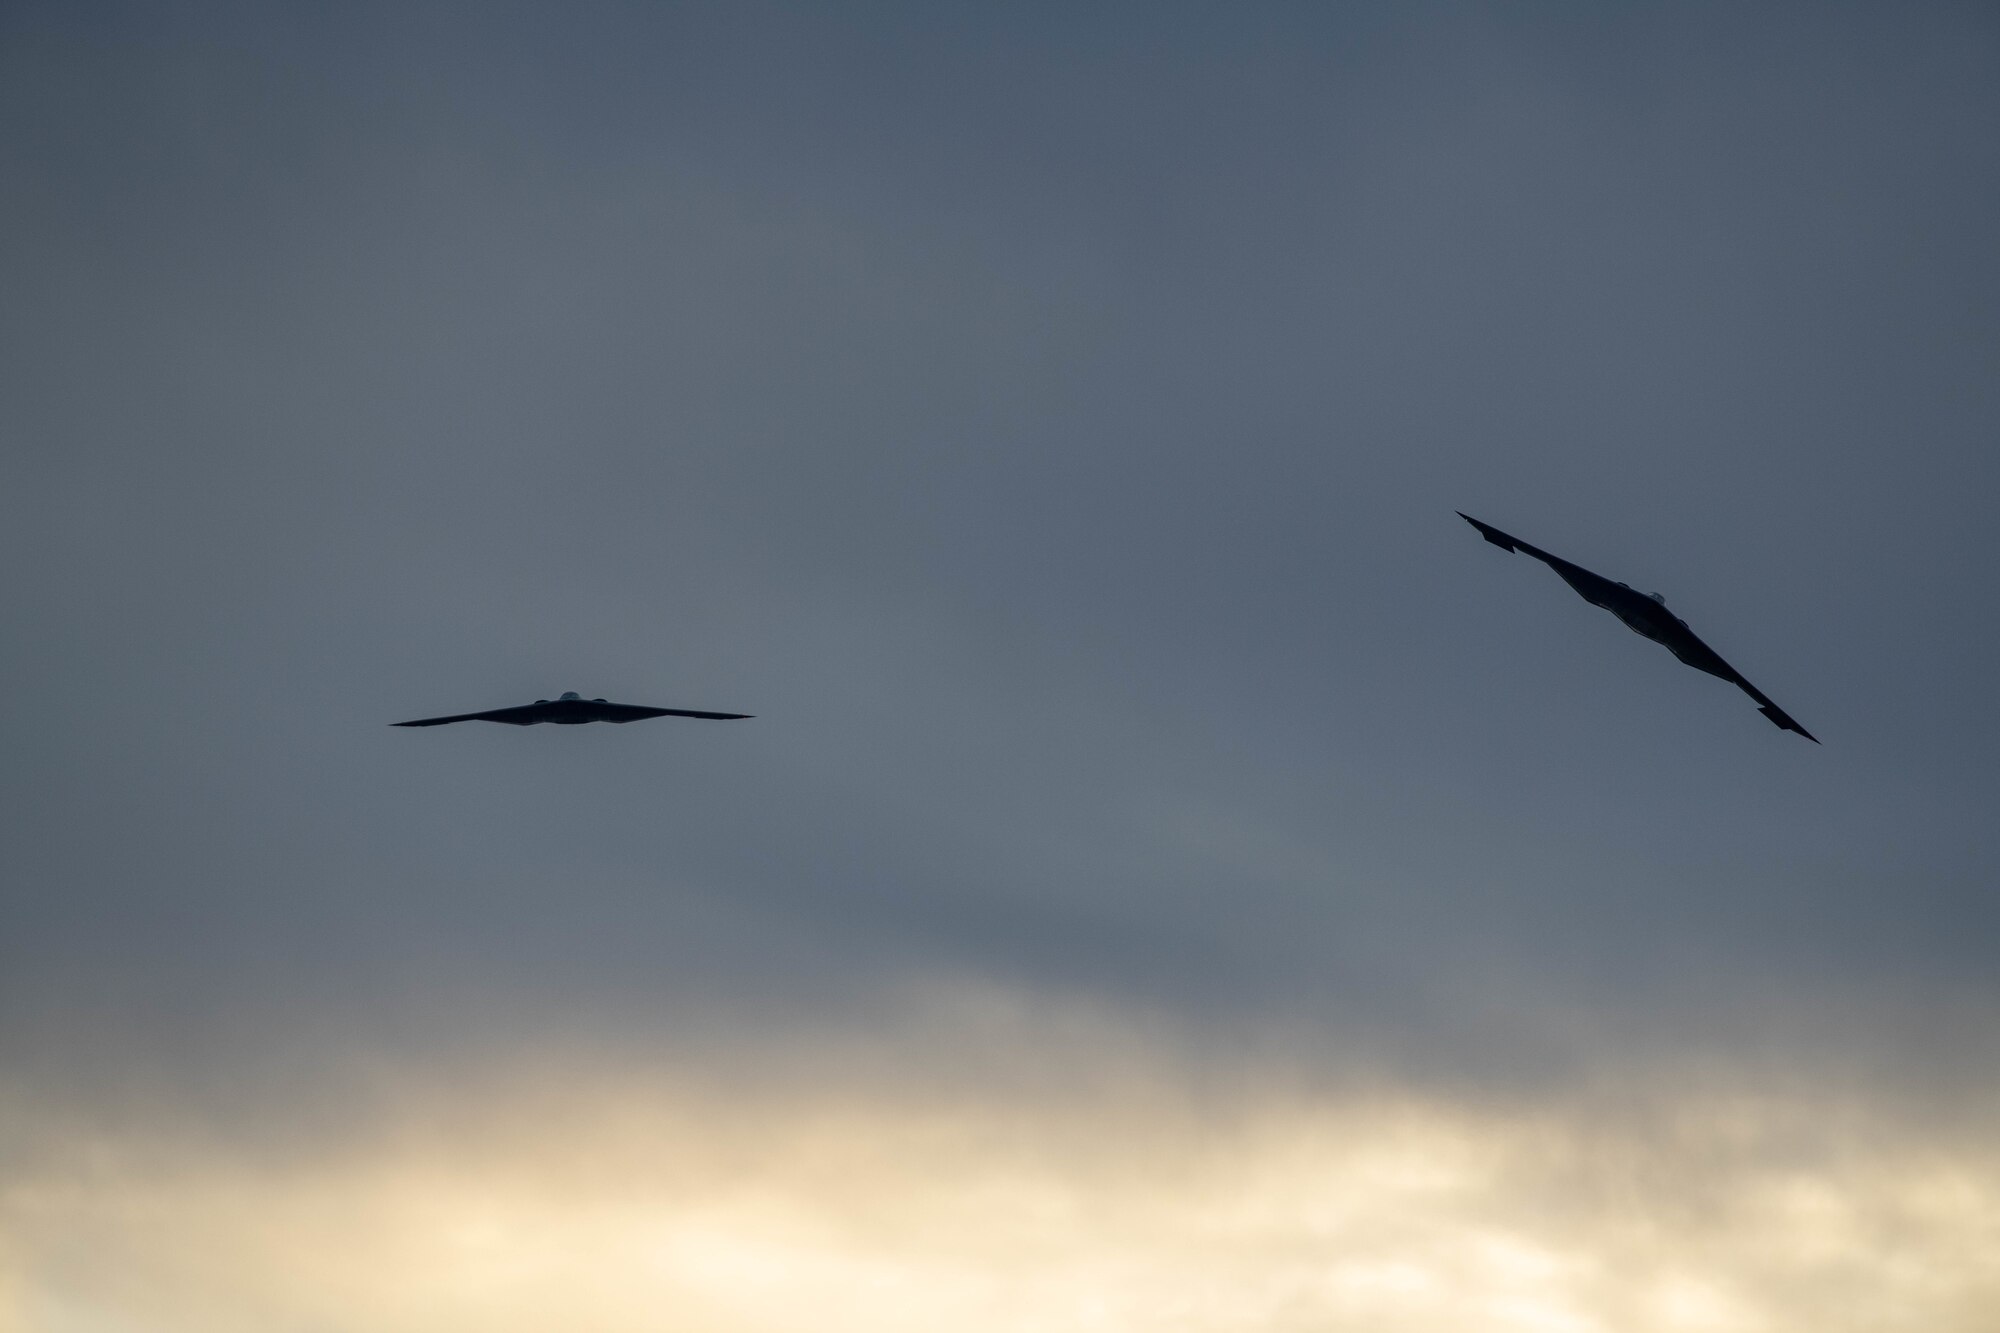 U.S. Air Force B-2 Spirit bombers assigned to the 509th Bomb Wing, Whiteman Air Force Base, Missouri, conduct off-station training Nov. 15, 2022, at Luke Air Force Base, Arizona.